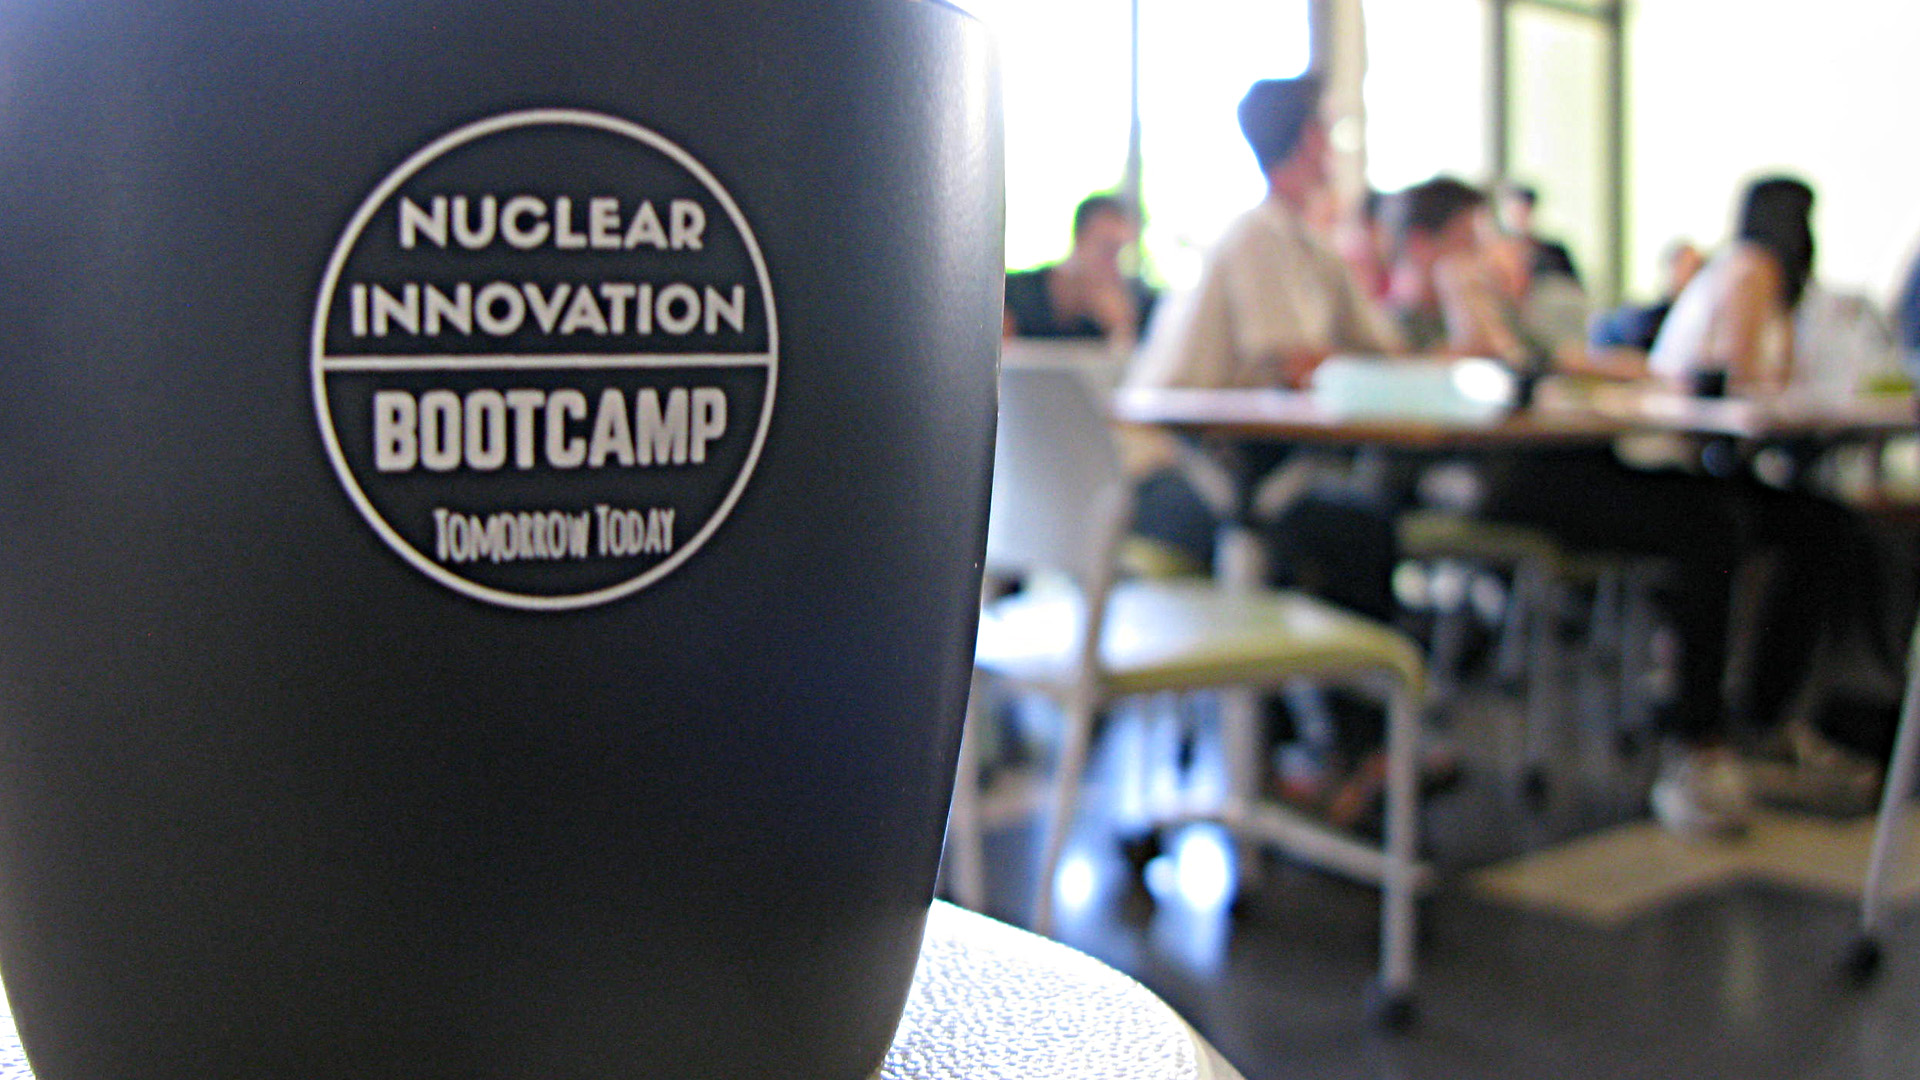 NPRE students gain valuable lessons from Nuclear Innovation Bootcamp experience